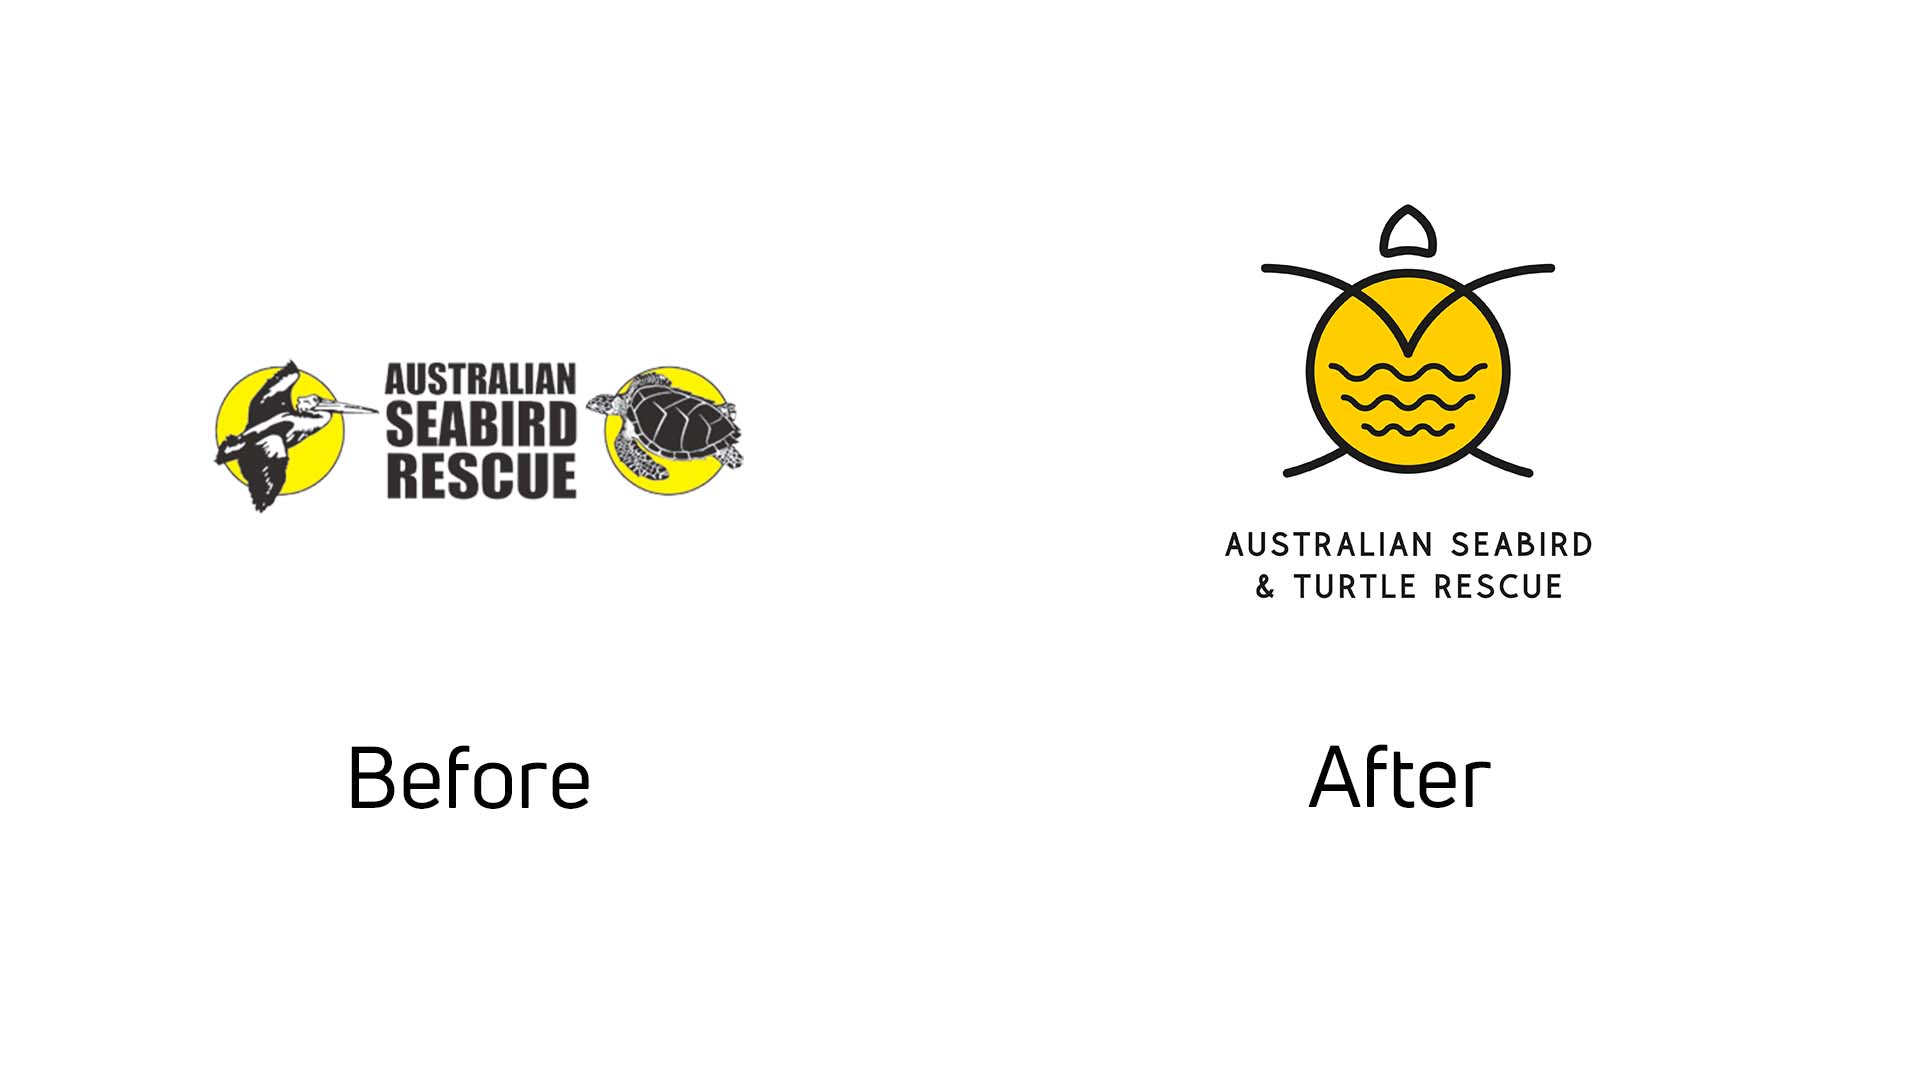 Australian Seabird & Turtle Rescue - before and after